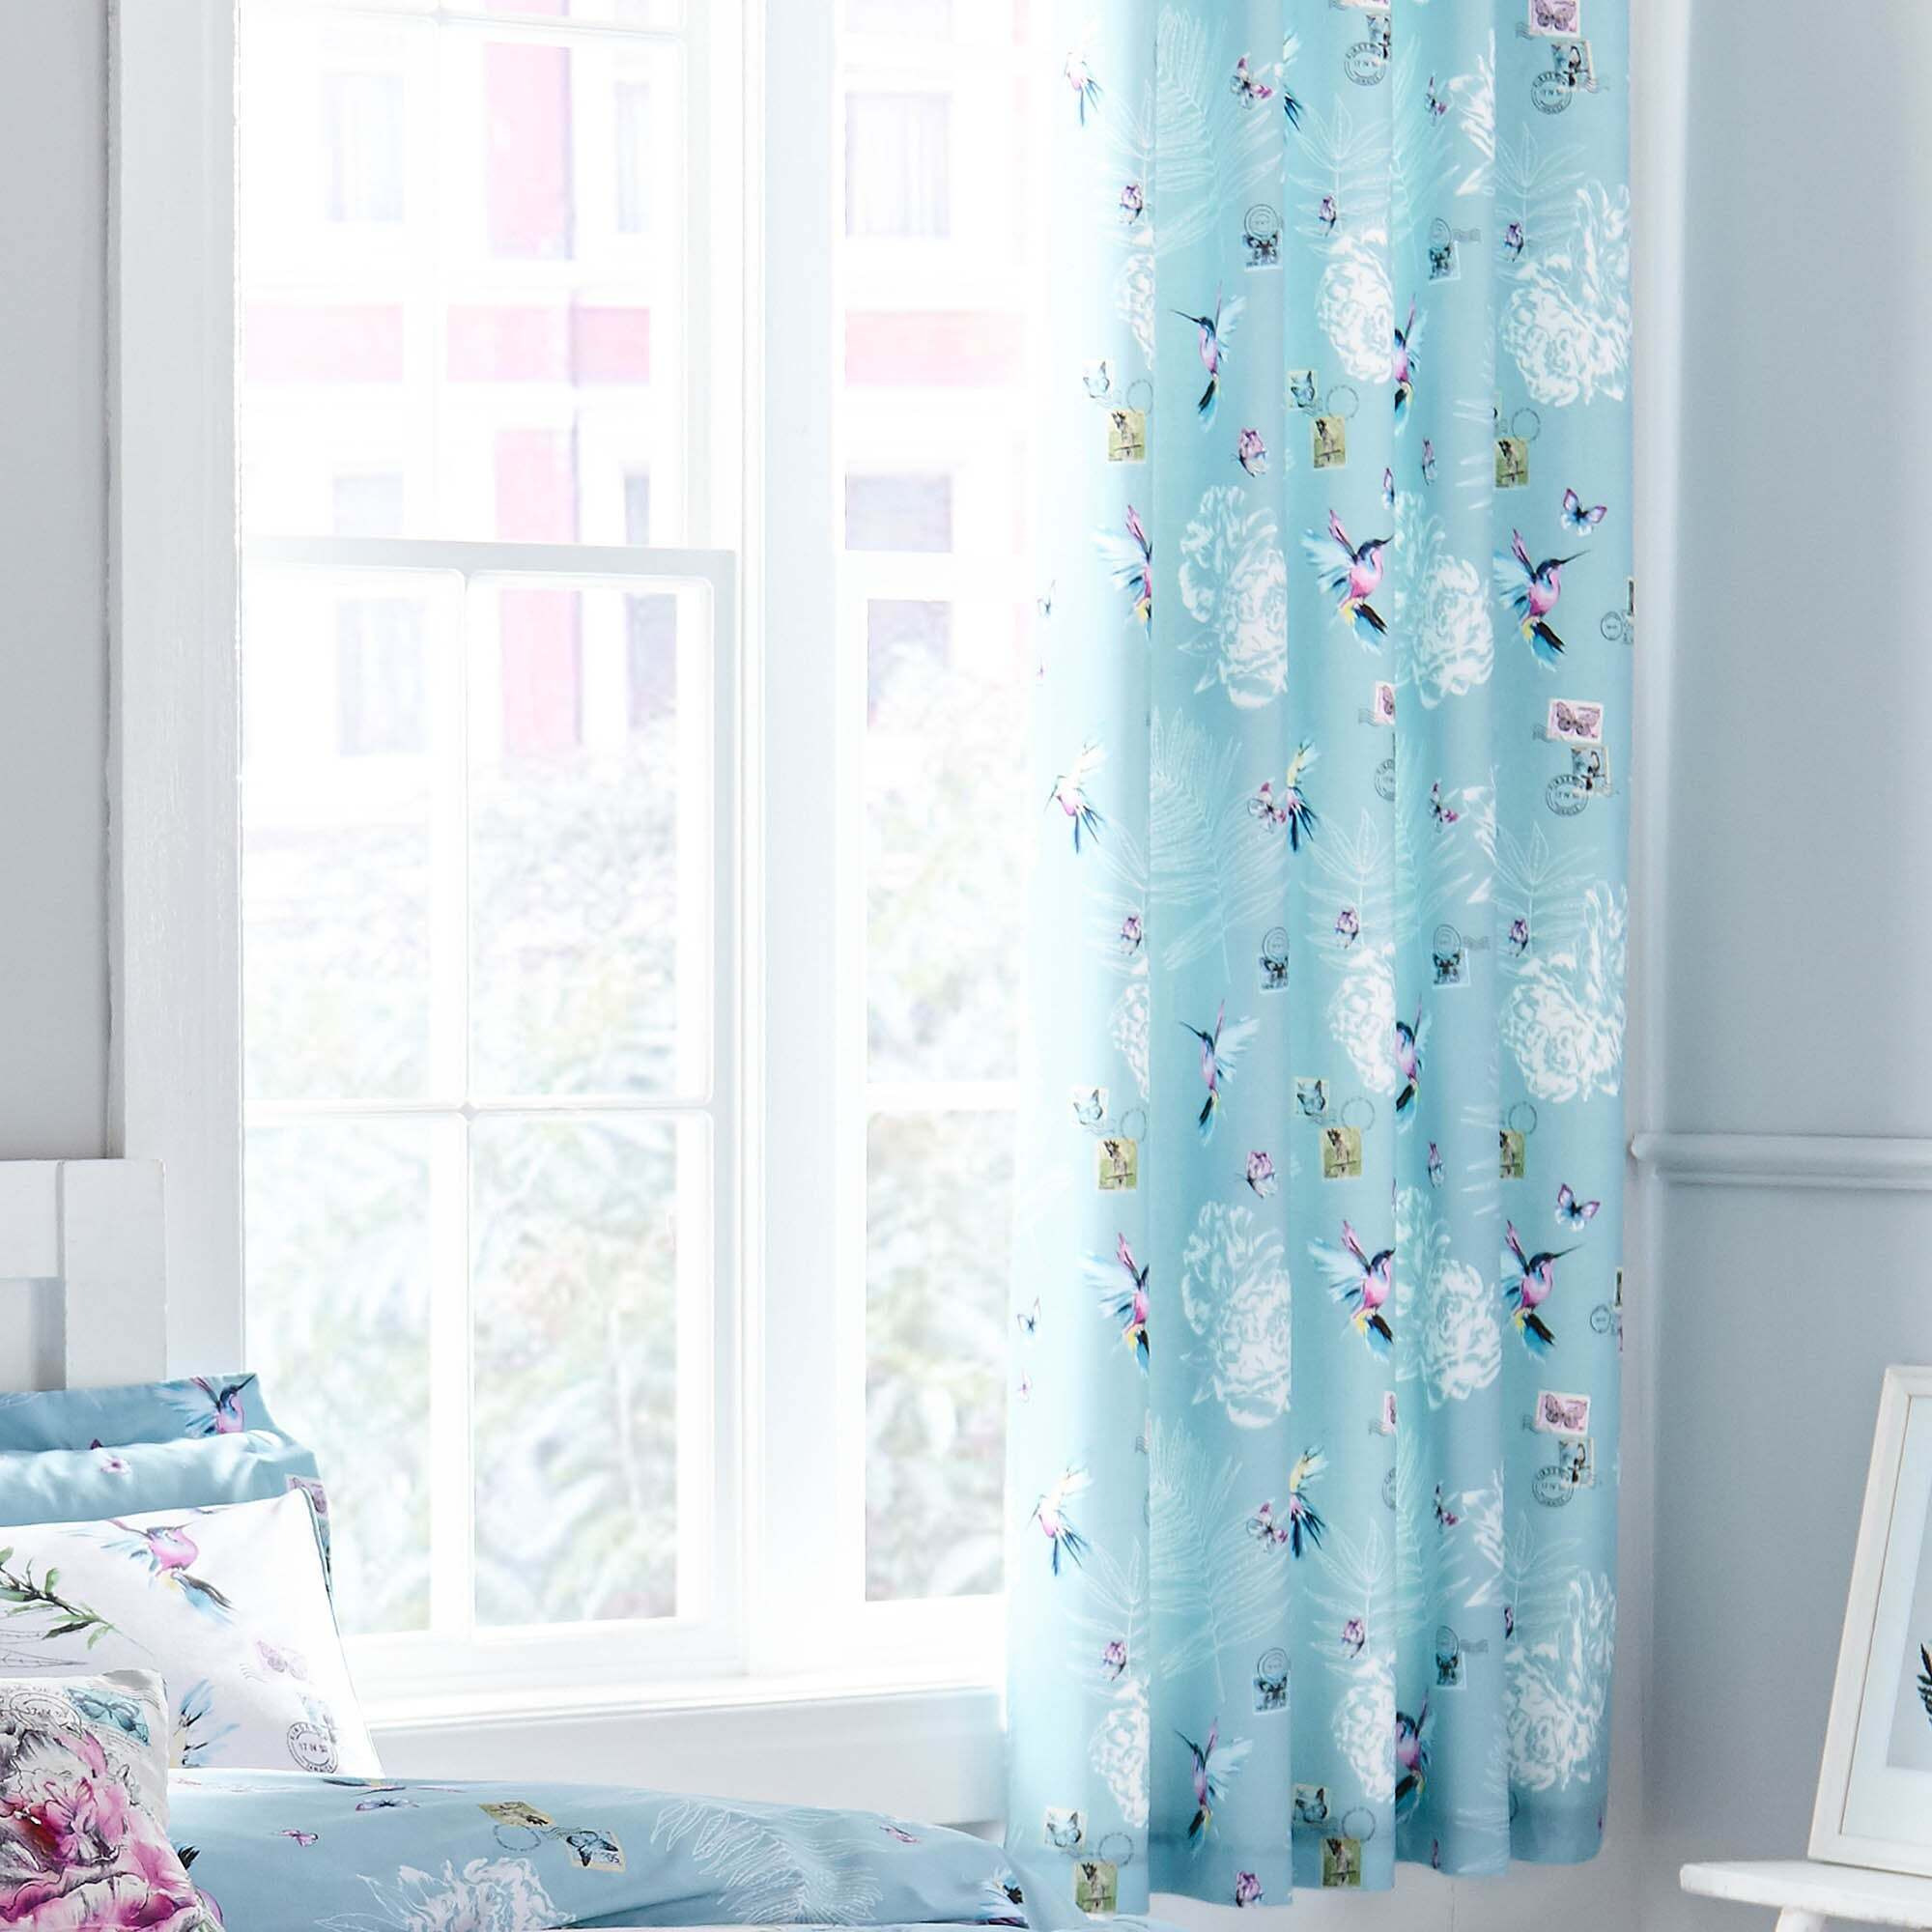 Sateen Blossom Floral Eyelet Blackout Curtains, M&S Collection